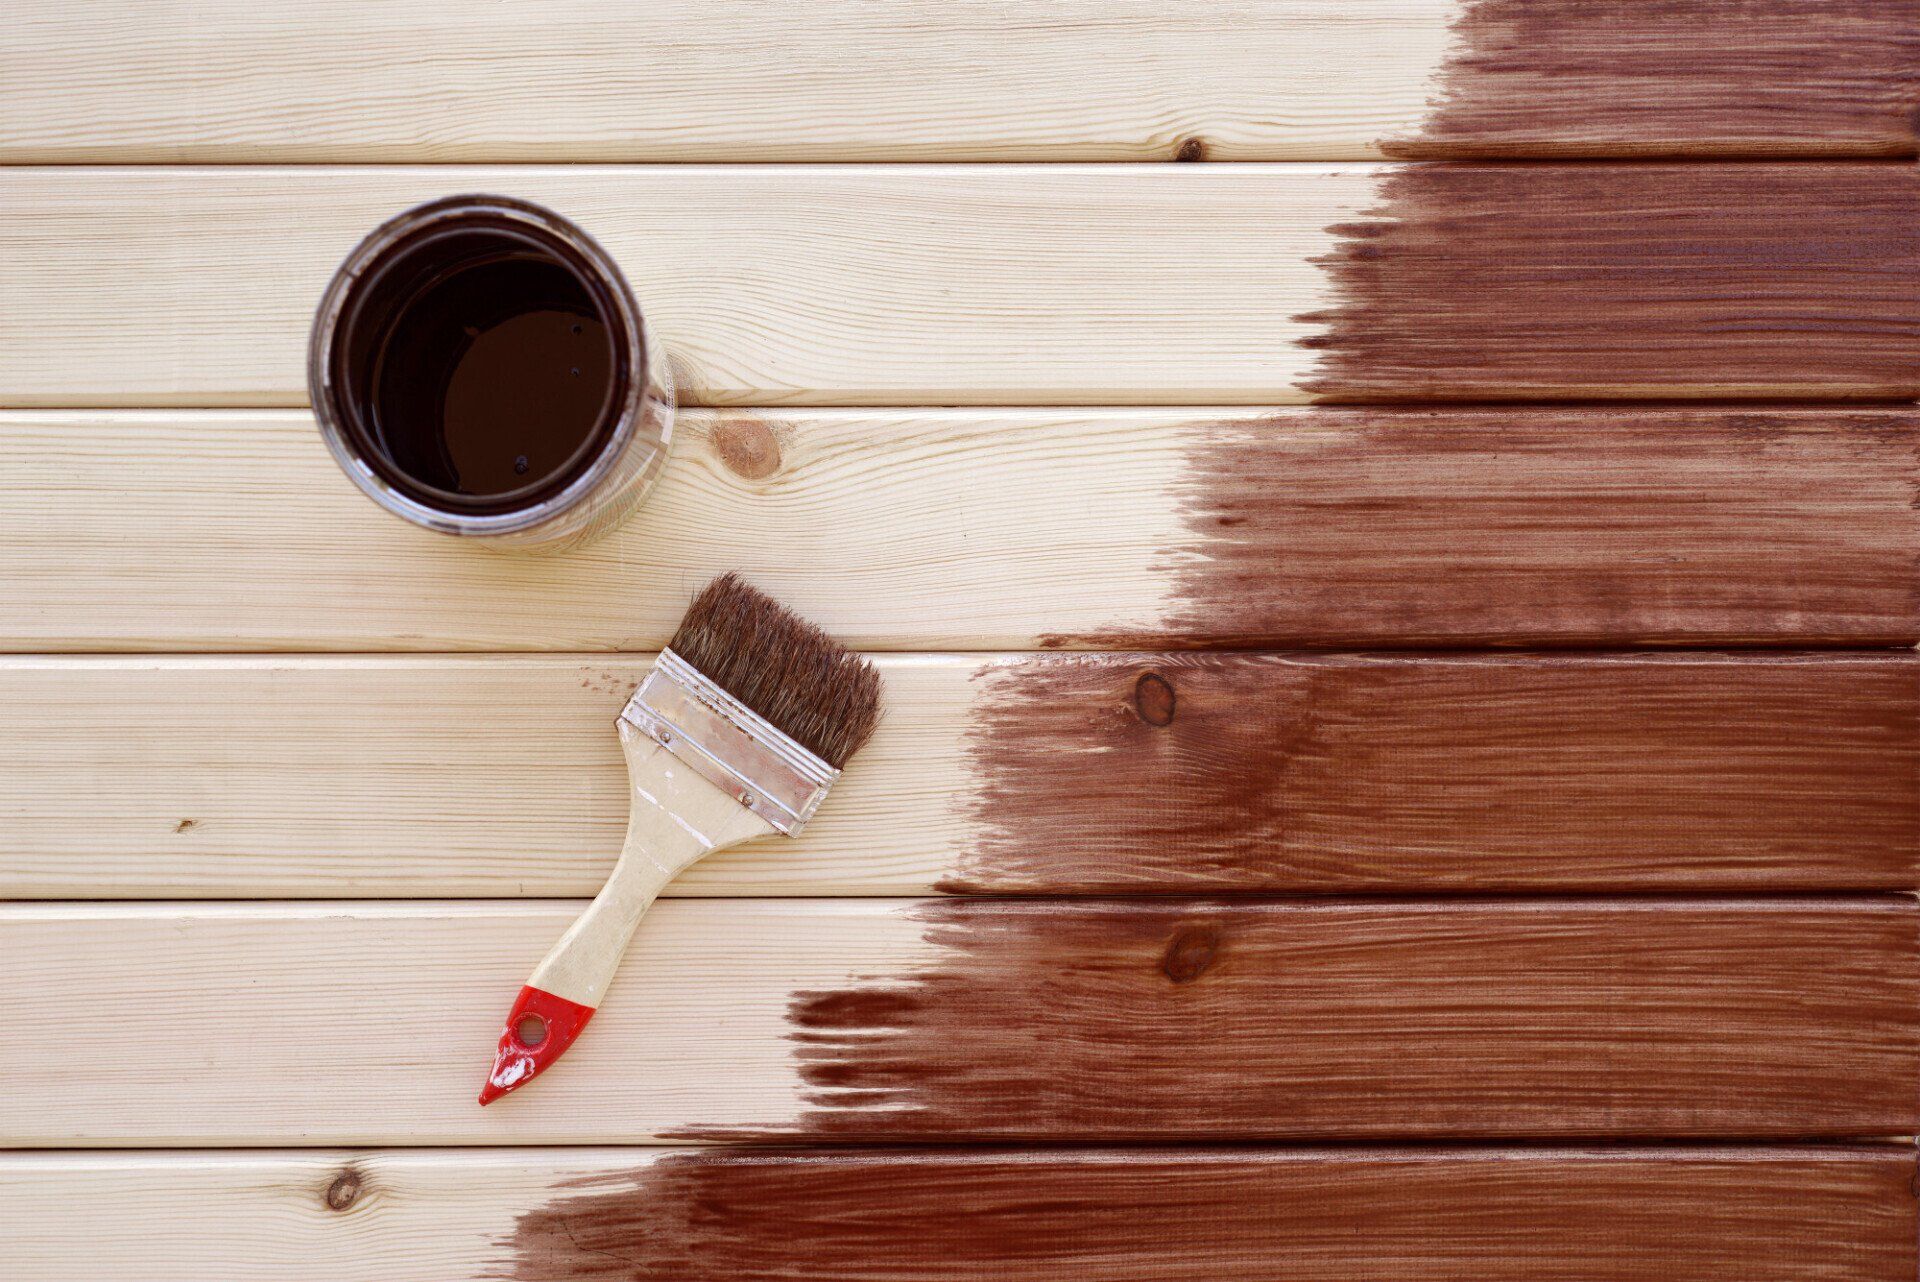 An image of a wooden surface with half of it painted, revealing brush strokes and a can of paint nearby.